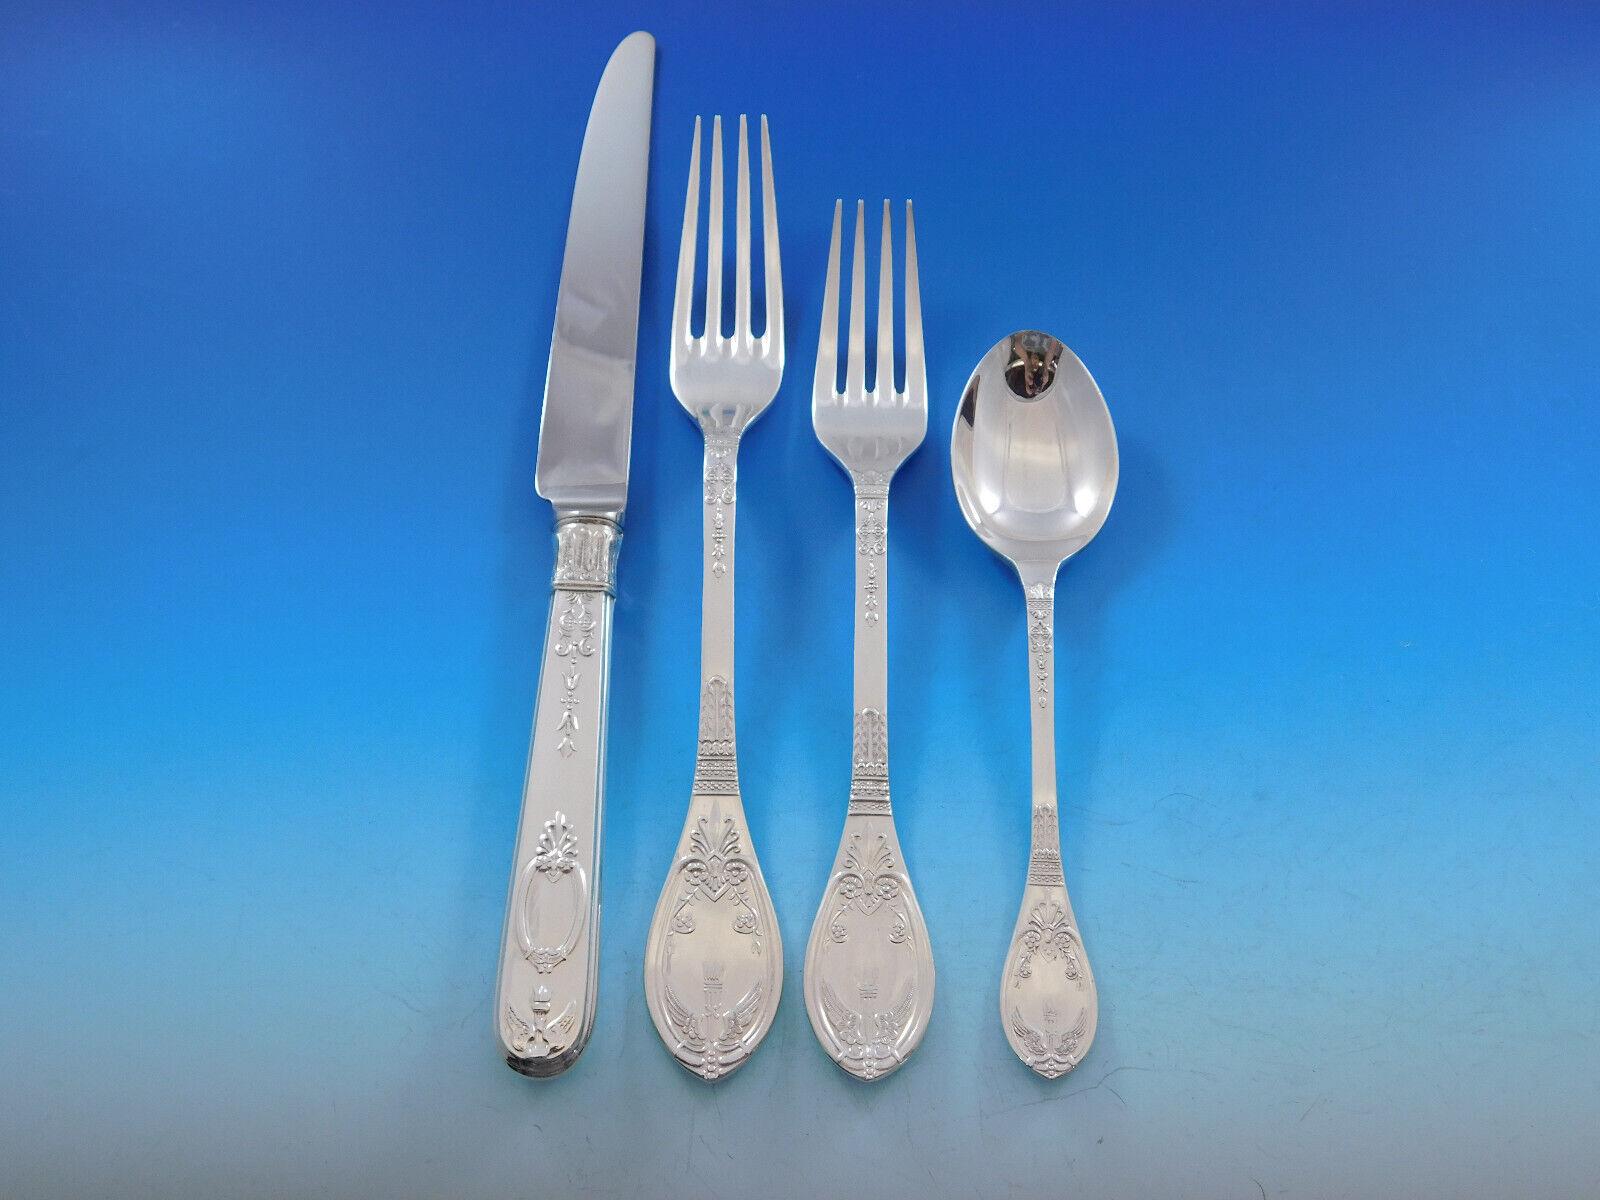 CARRS is the premier brand of sterling silver cutlery in Britain. It is superbly hand-crafted in Sheffield - deservedly Britain's best selling range of sterling silver cutlery. This magnificent sterling silver cutlery will last for